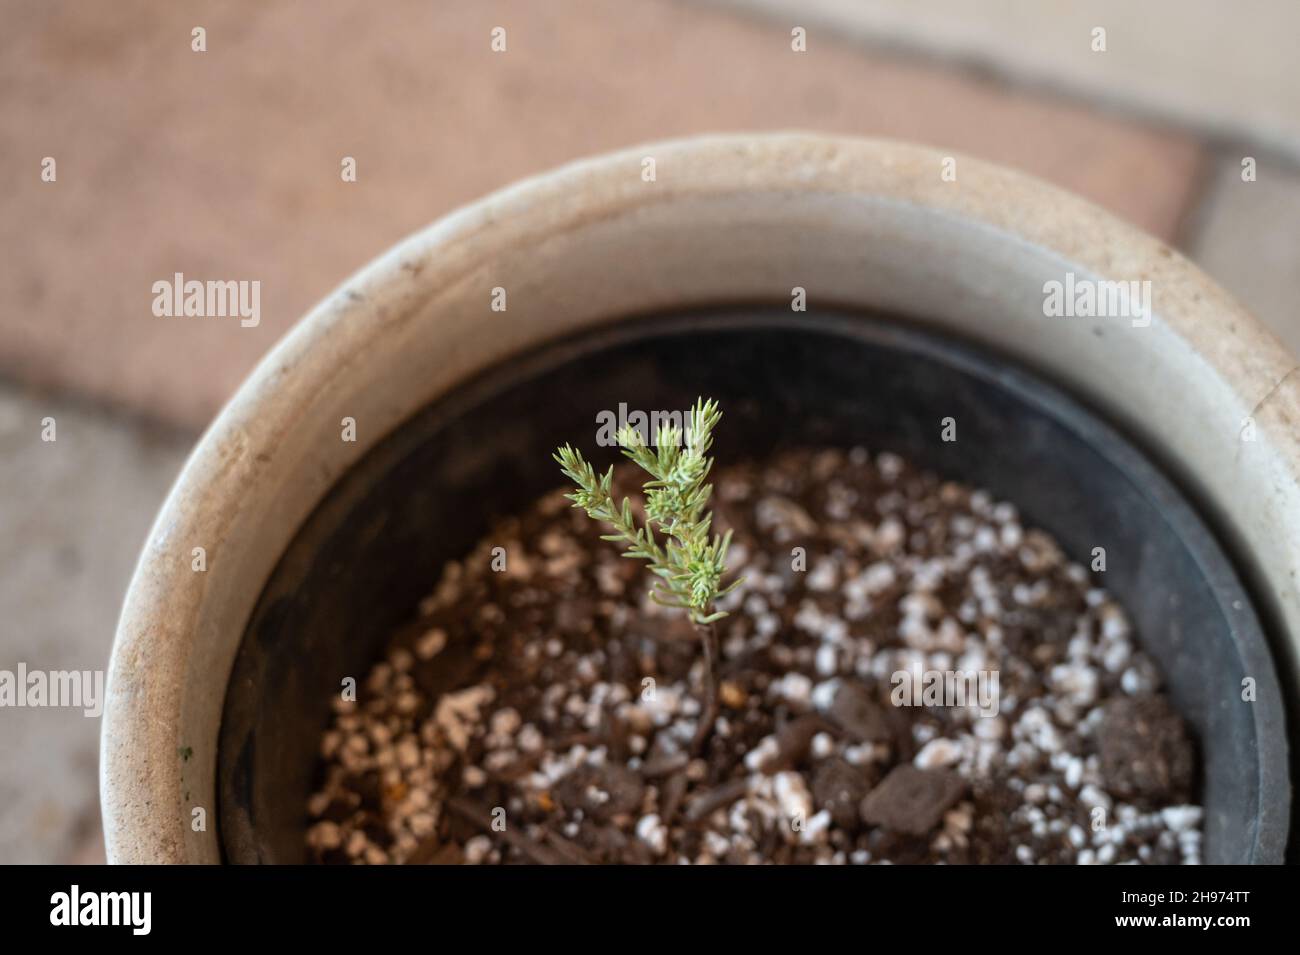 Young giant sequoia tree seedling planted in a pot for conservation  Stock Photo